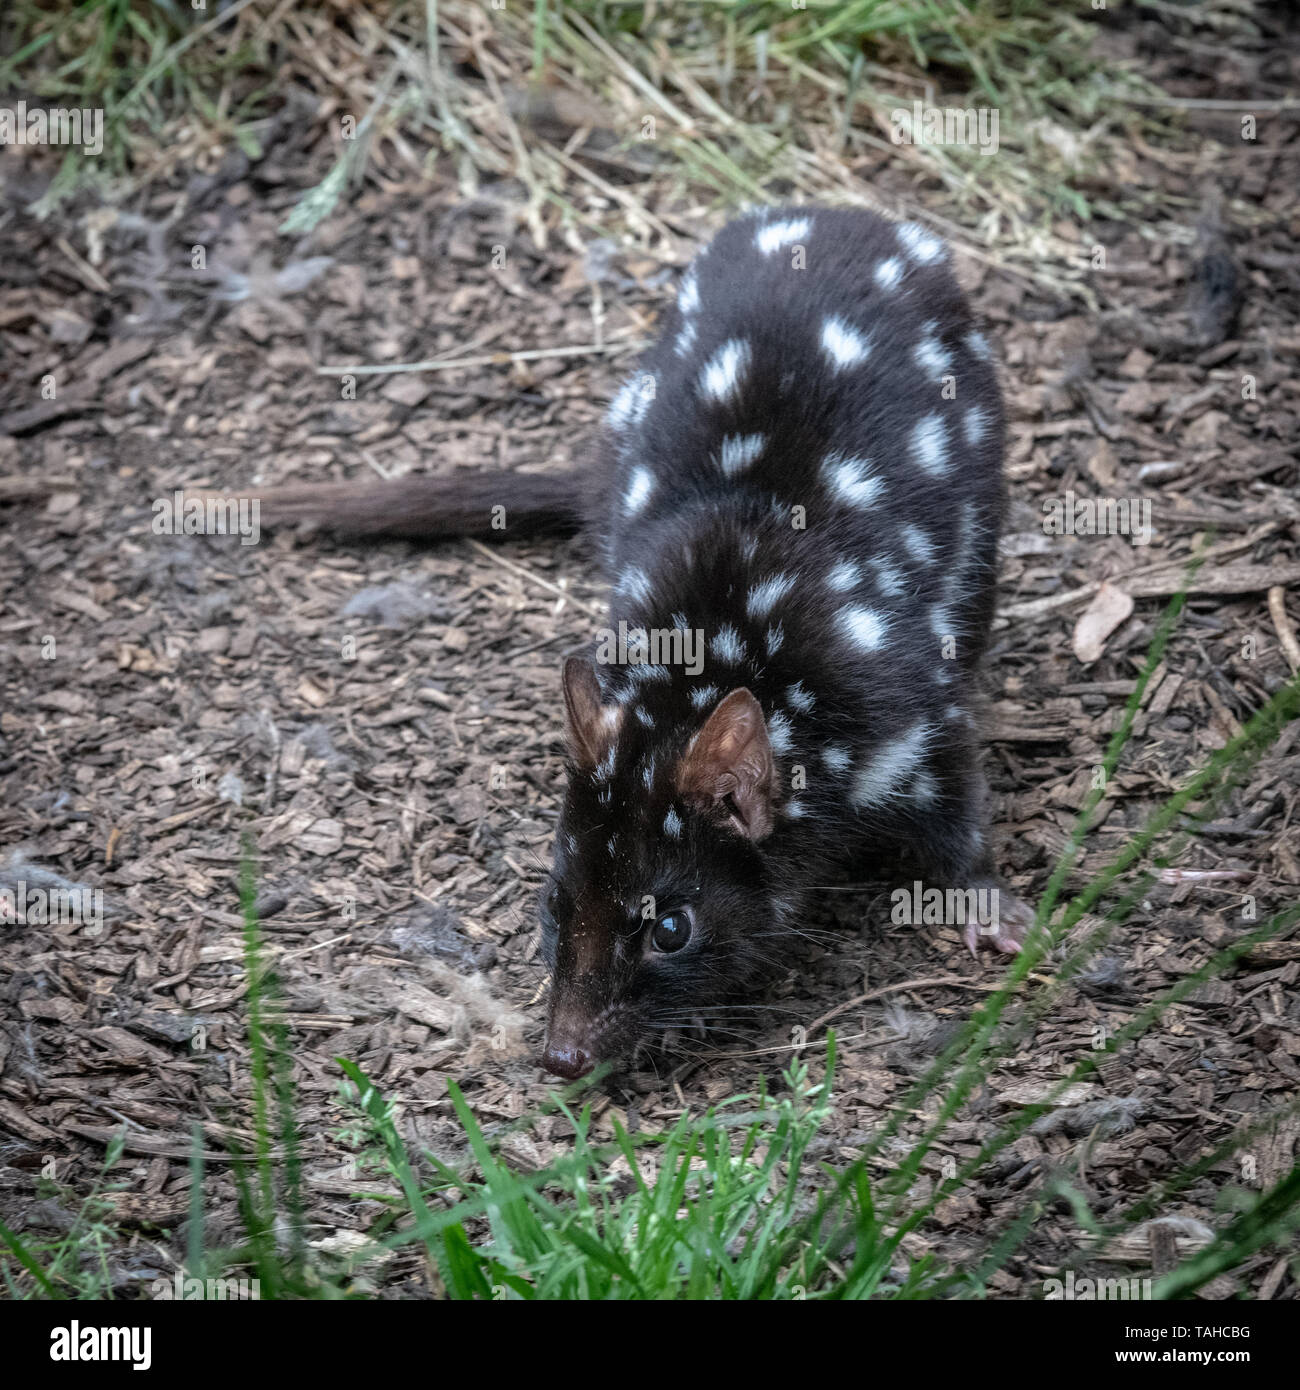 Spotted Eastern Quoll, Tasmania Stock Photo